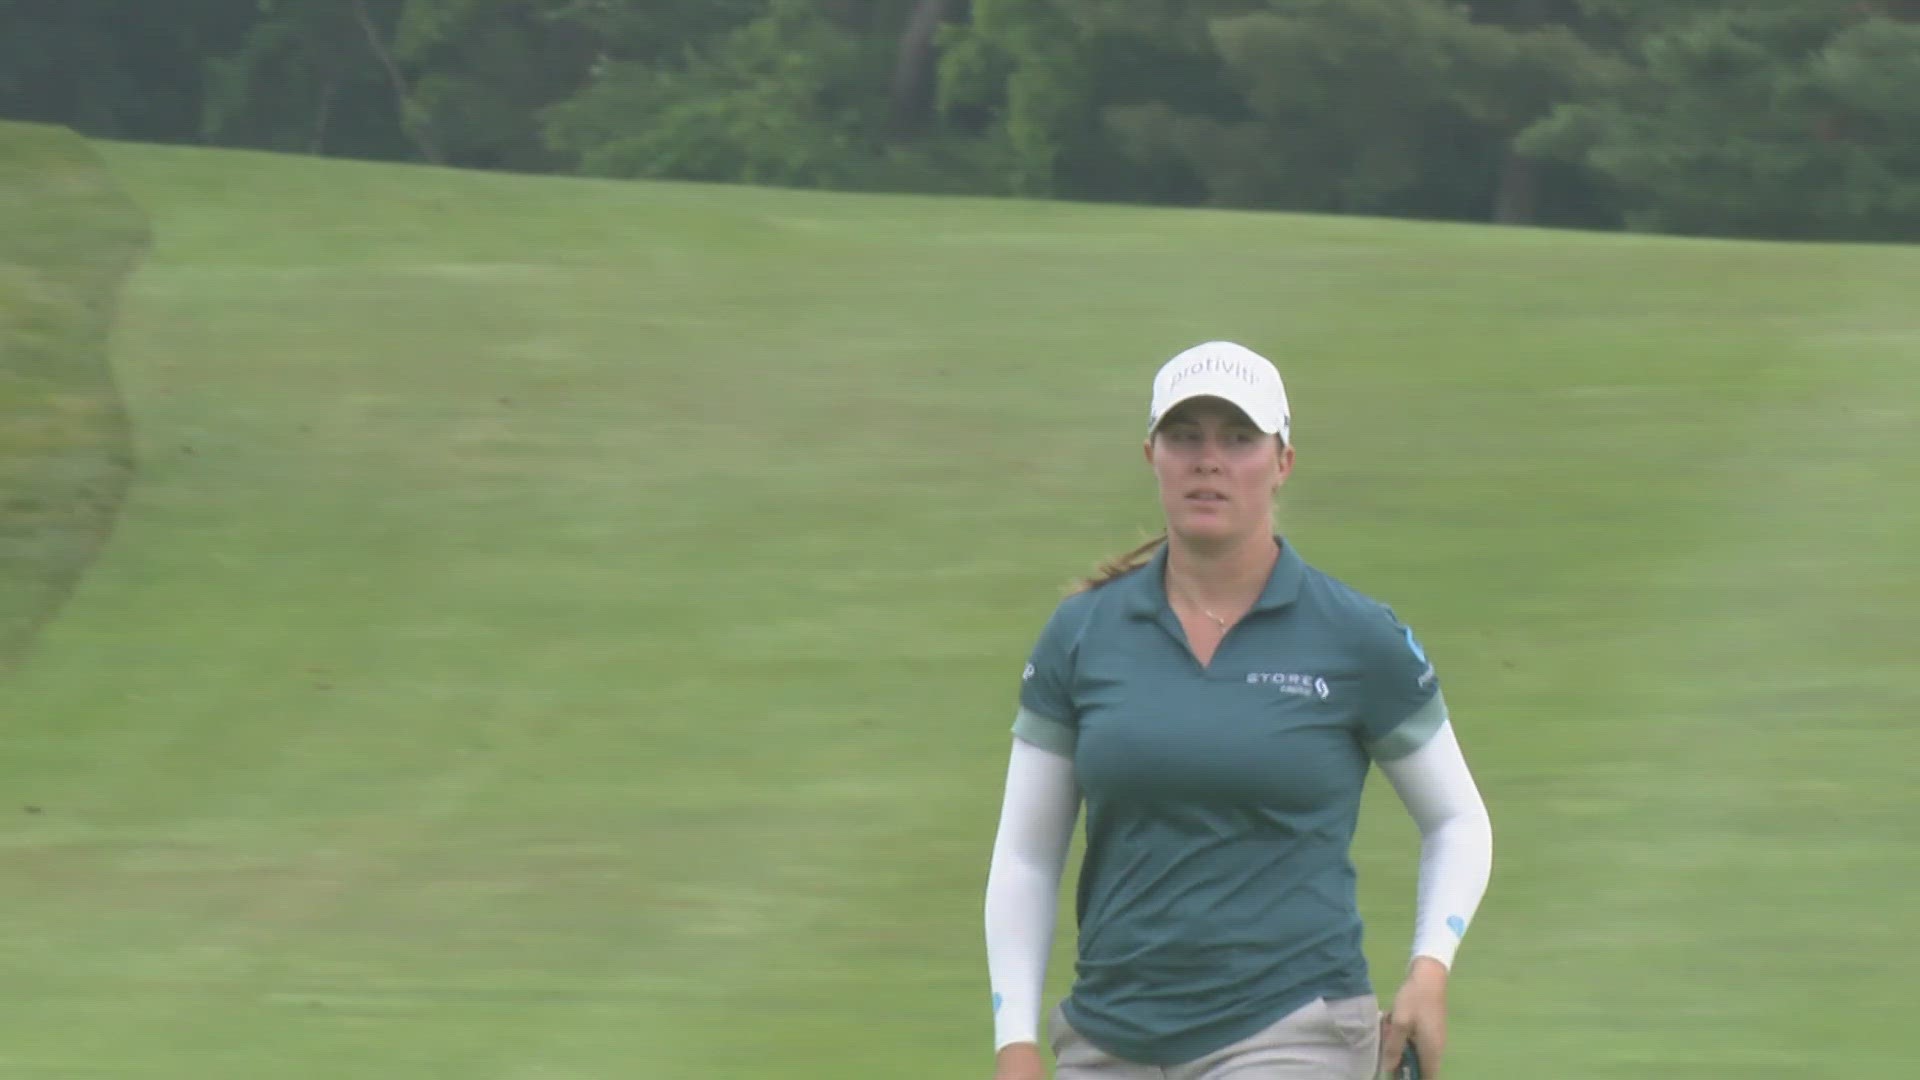 Defending champion Jennifer Kupcho birdied the par-5 18th for a 6-under 66 and a share of the first-round lead Thursday in the Meijer LPGA Classic.